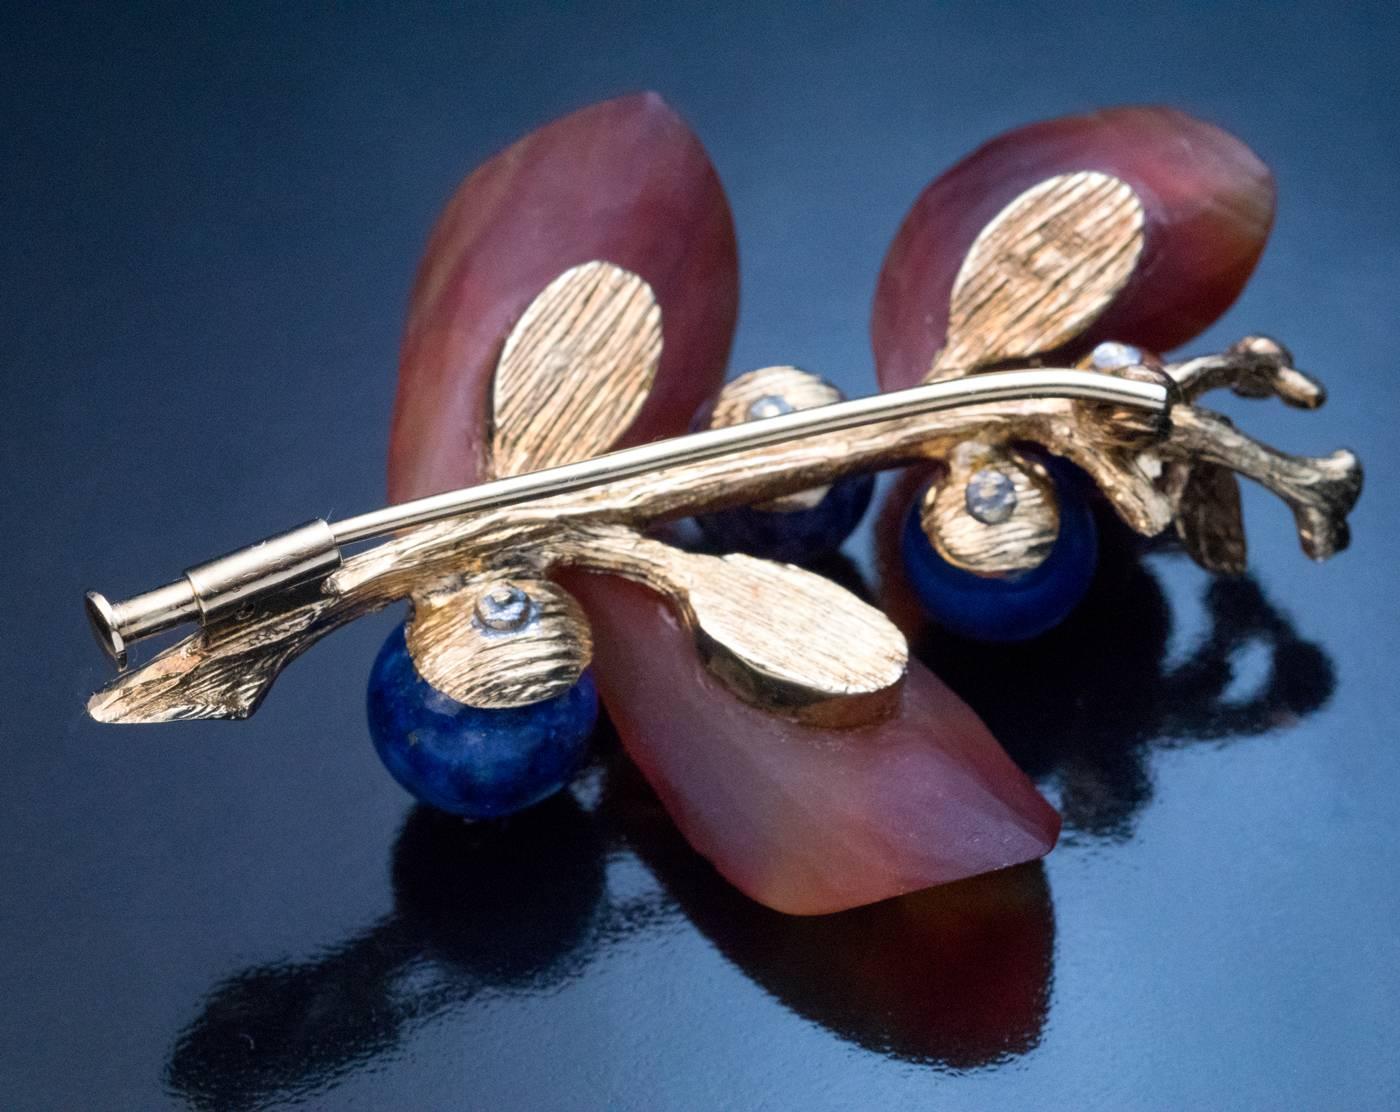 Austrian, Vienna, circa 1950s

The brooch is designed as a textured 14K gold branch with hand carved agate leaves and lapis lazuli berries embellished with diamonds (approximately 0.20 ct total weight).

Marked with maker’s initials, 585 gold